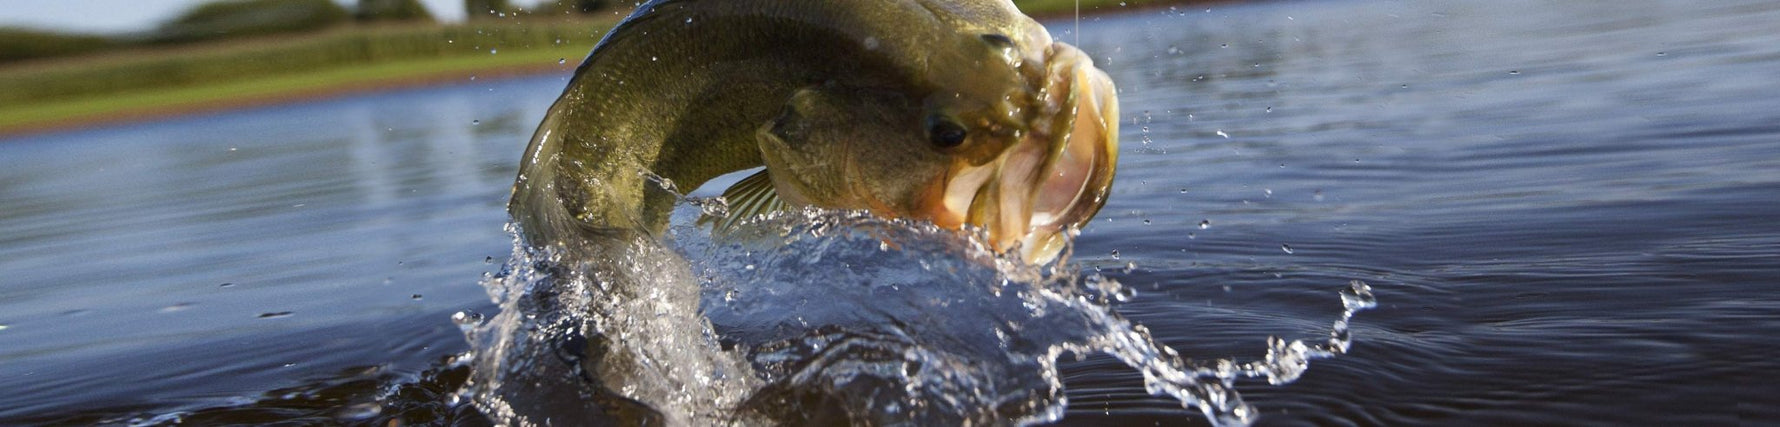 Hooked on New Jersey: Top Freshwater Fishing Spots for Bass and More - Obee Fishing Co.